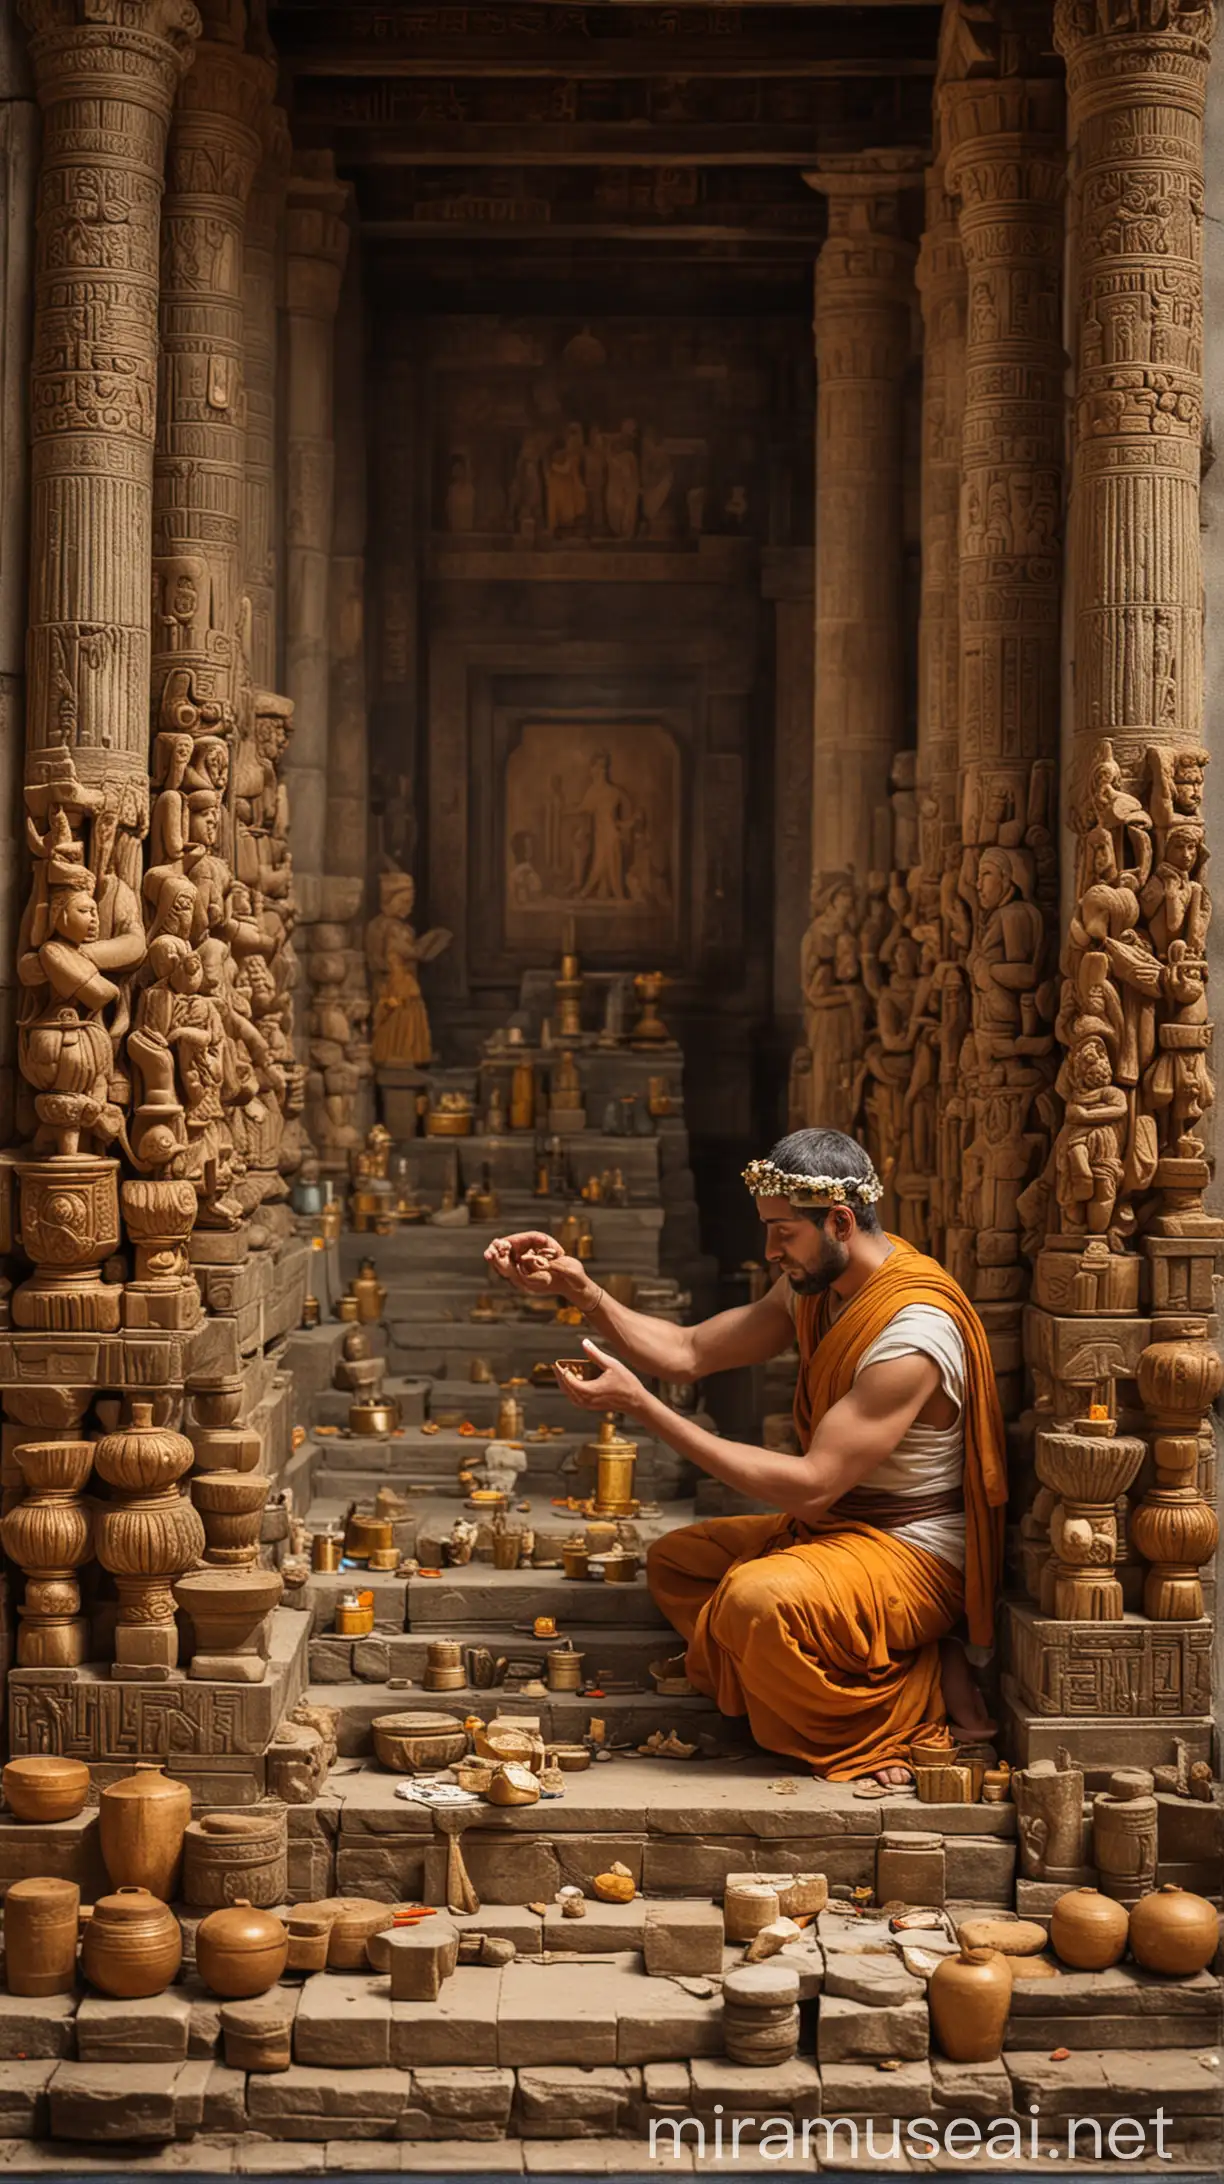 Depict a man meticulously arranging the various gifts, tithes, and offerings in the temple. In ancient world 